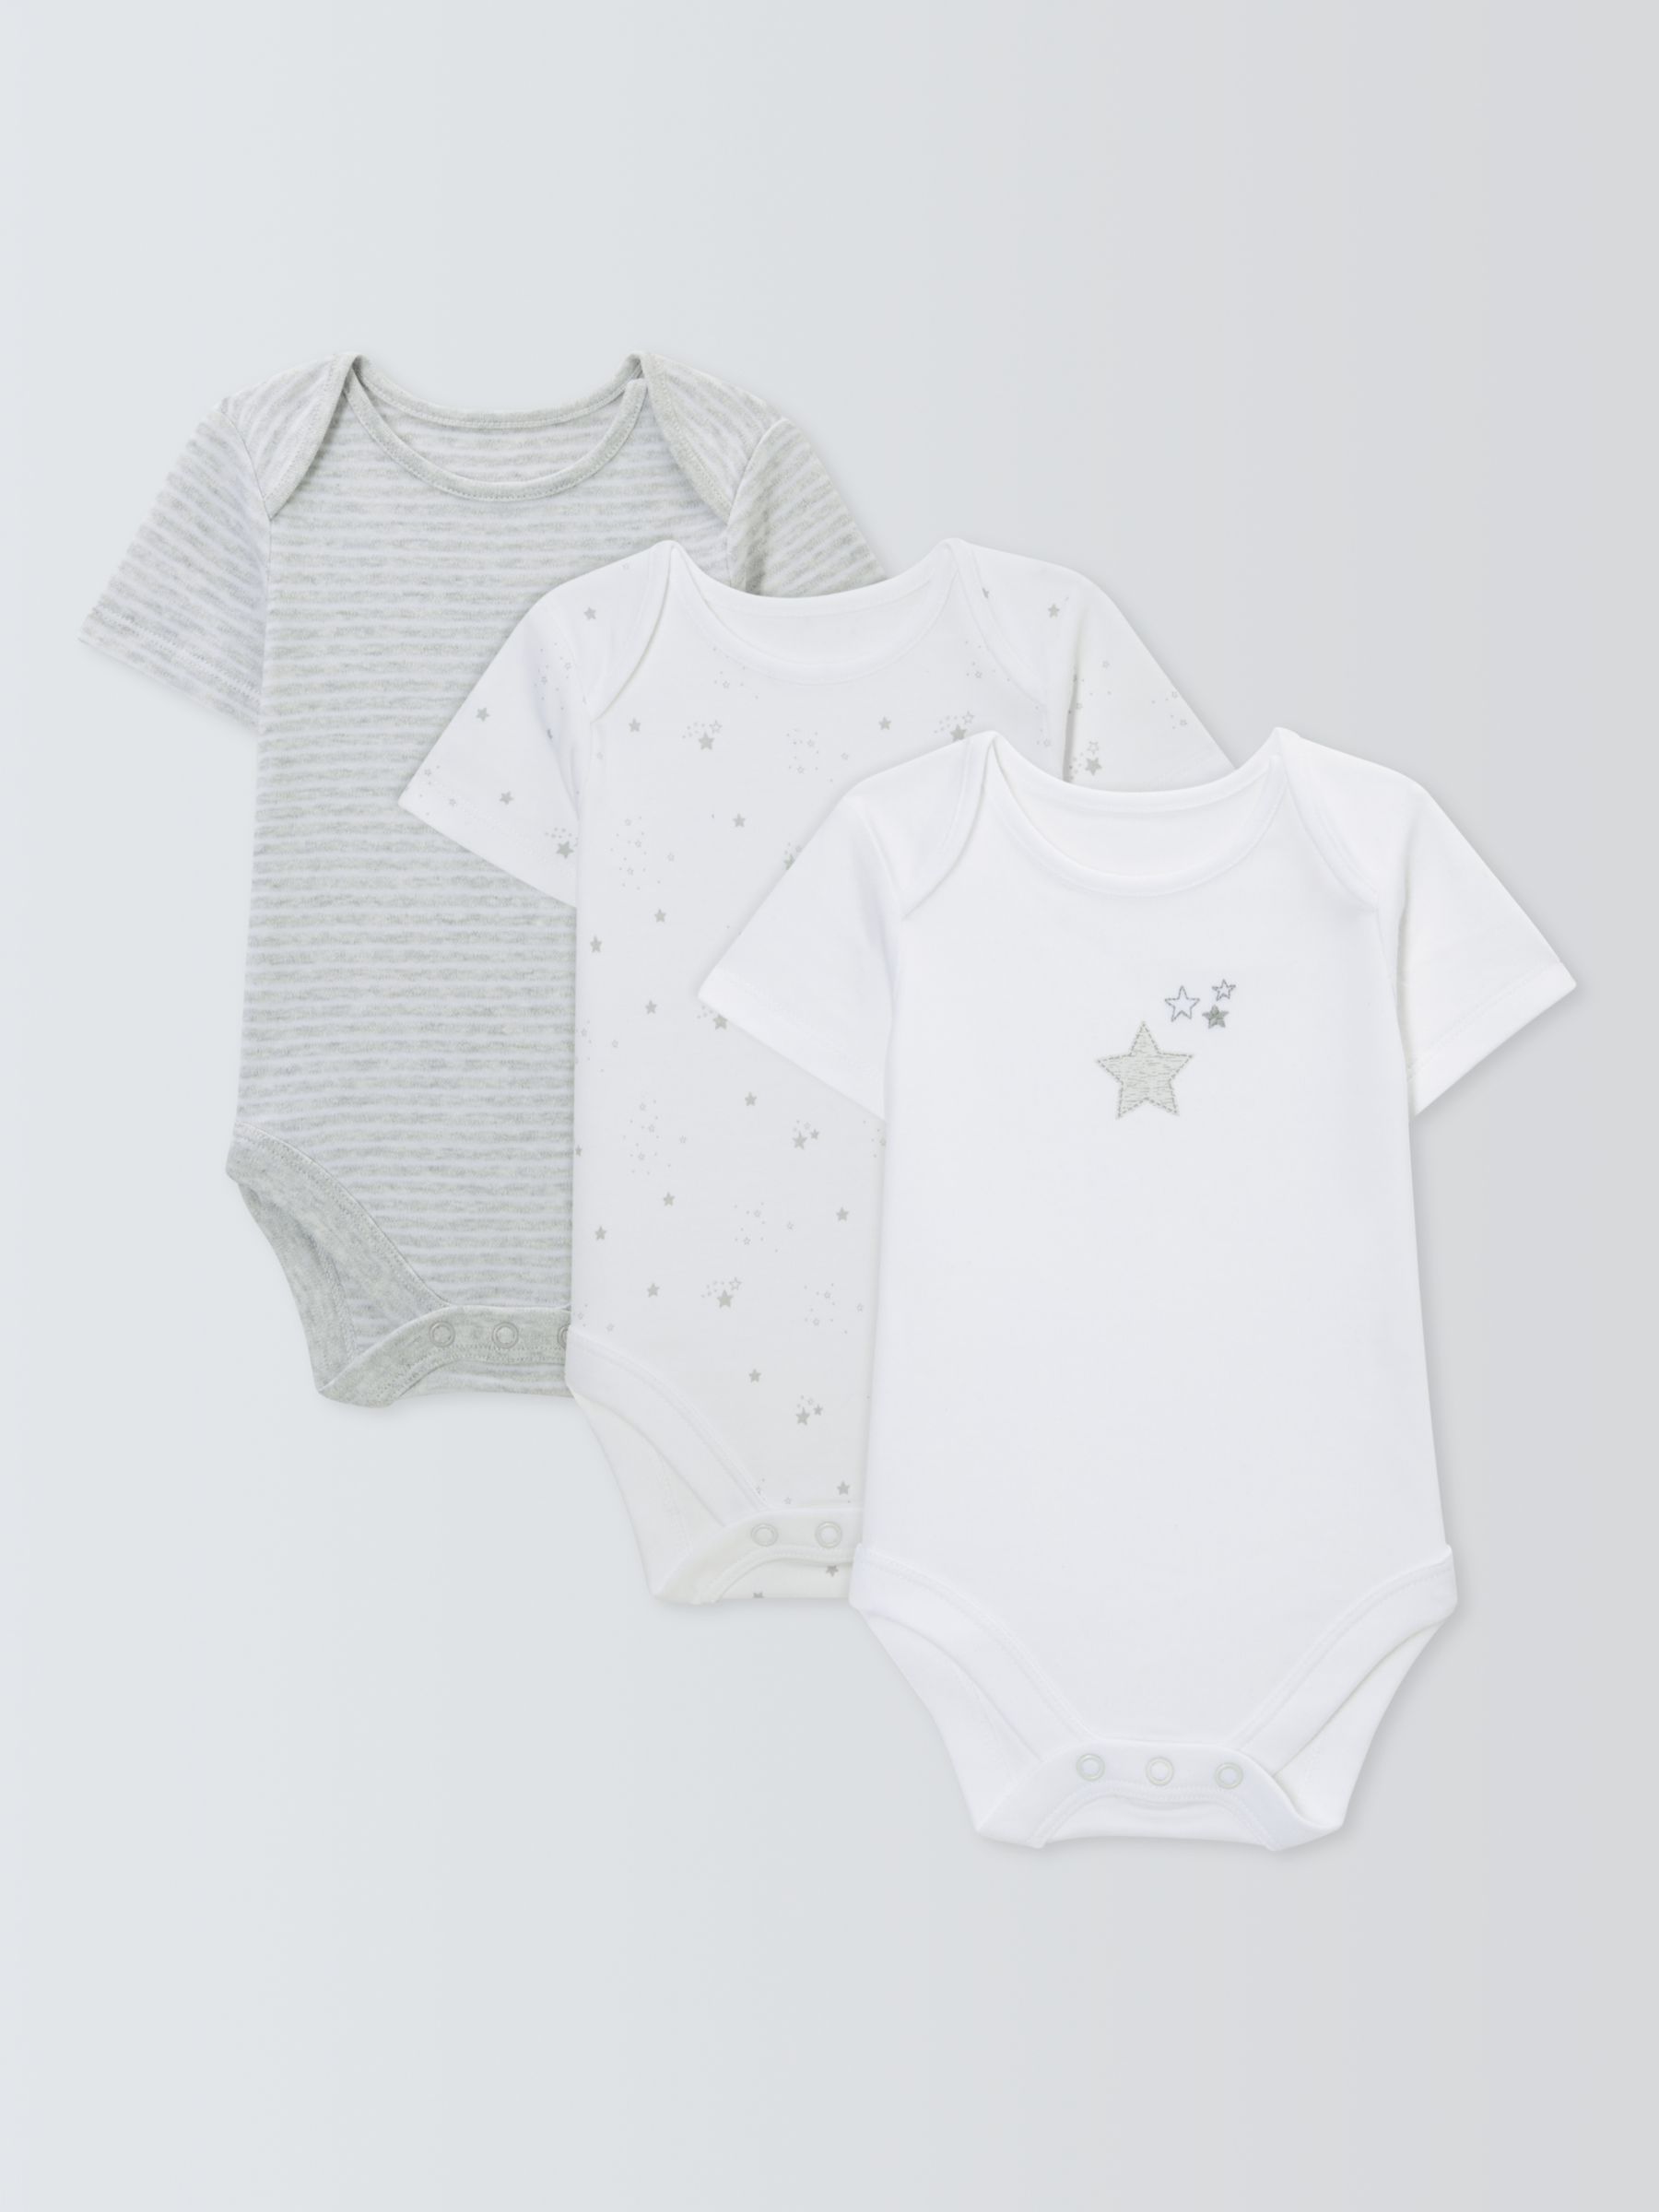 John Lewis Baby Cotton Star Print Bodysuits, Pack of 3, White, 6-9 months